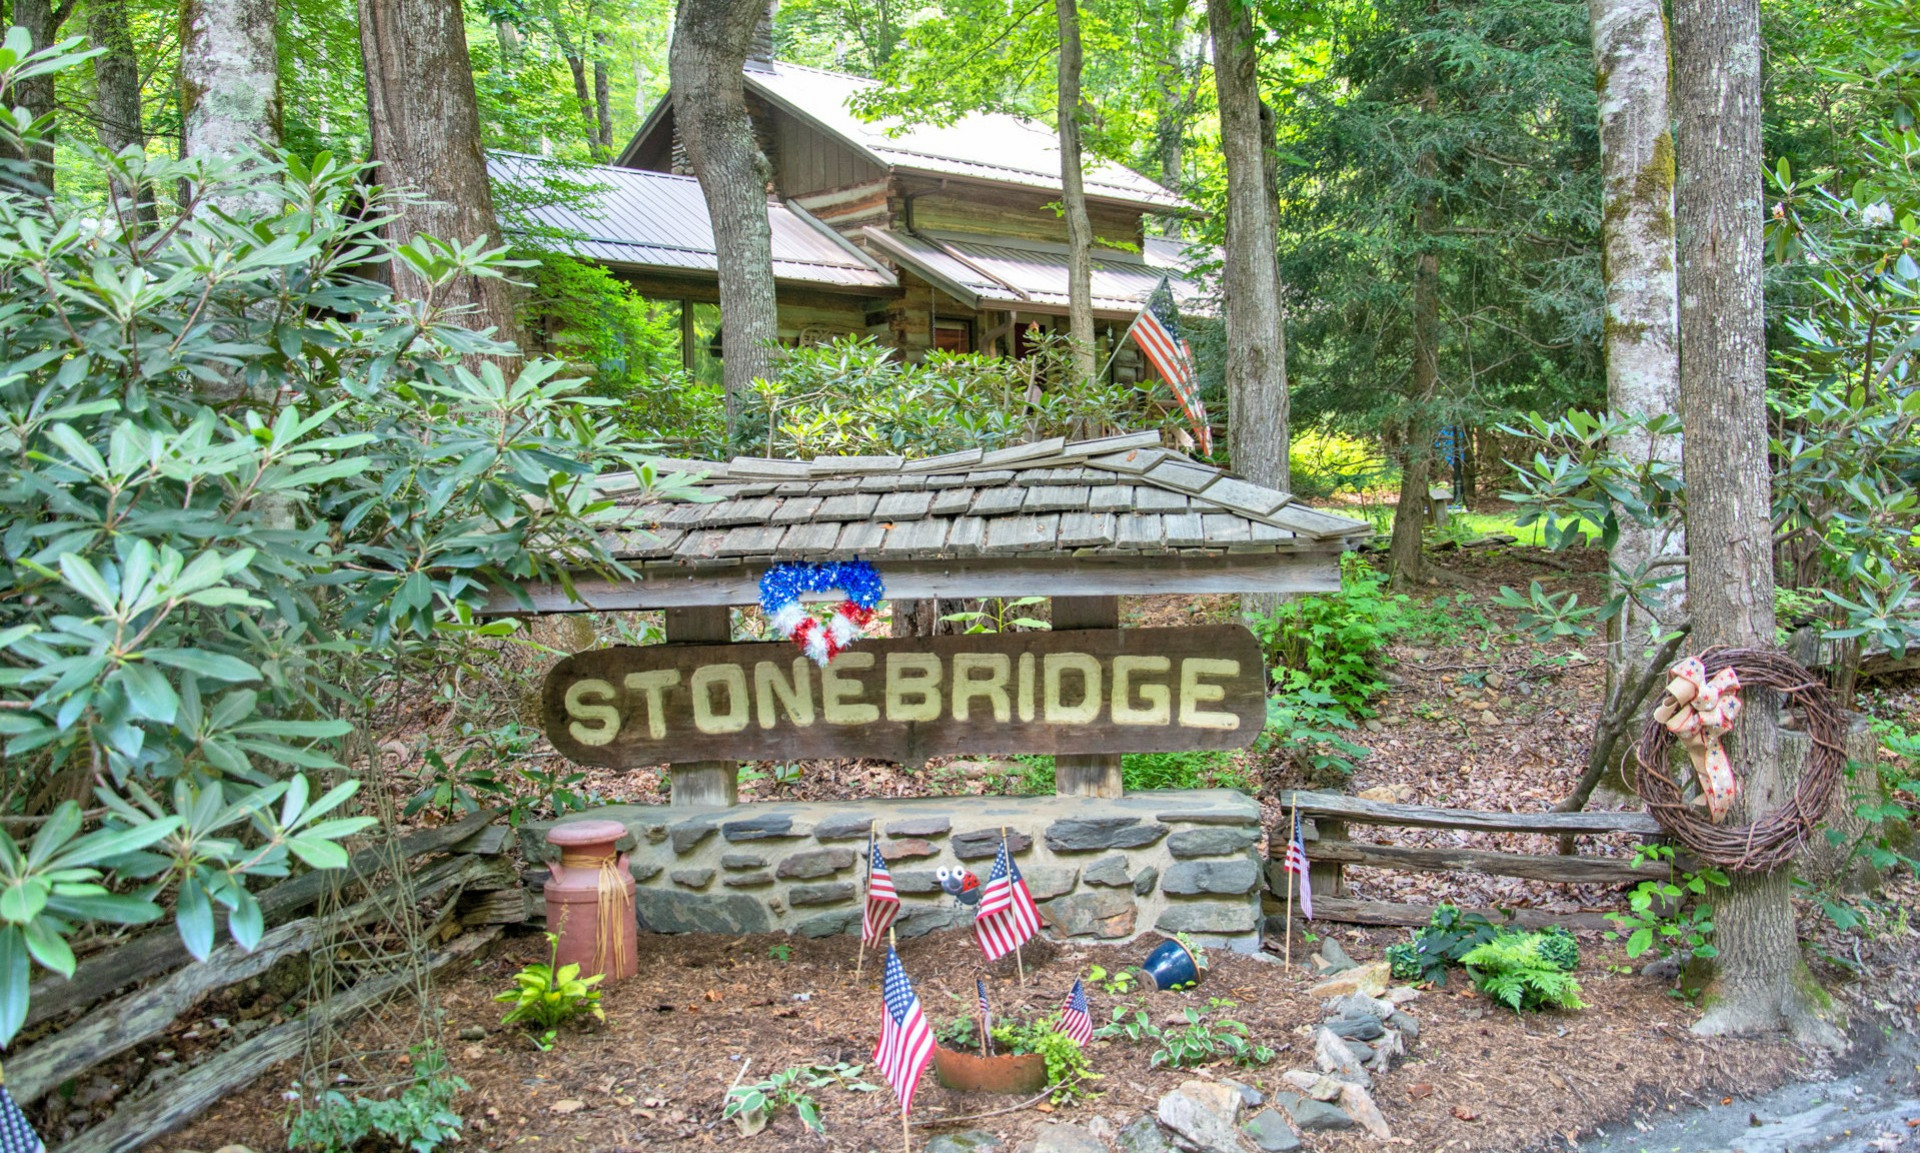 Come experience true mountain living in Stonebridge, one of Ashe County's most sought-after log cabin communities.